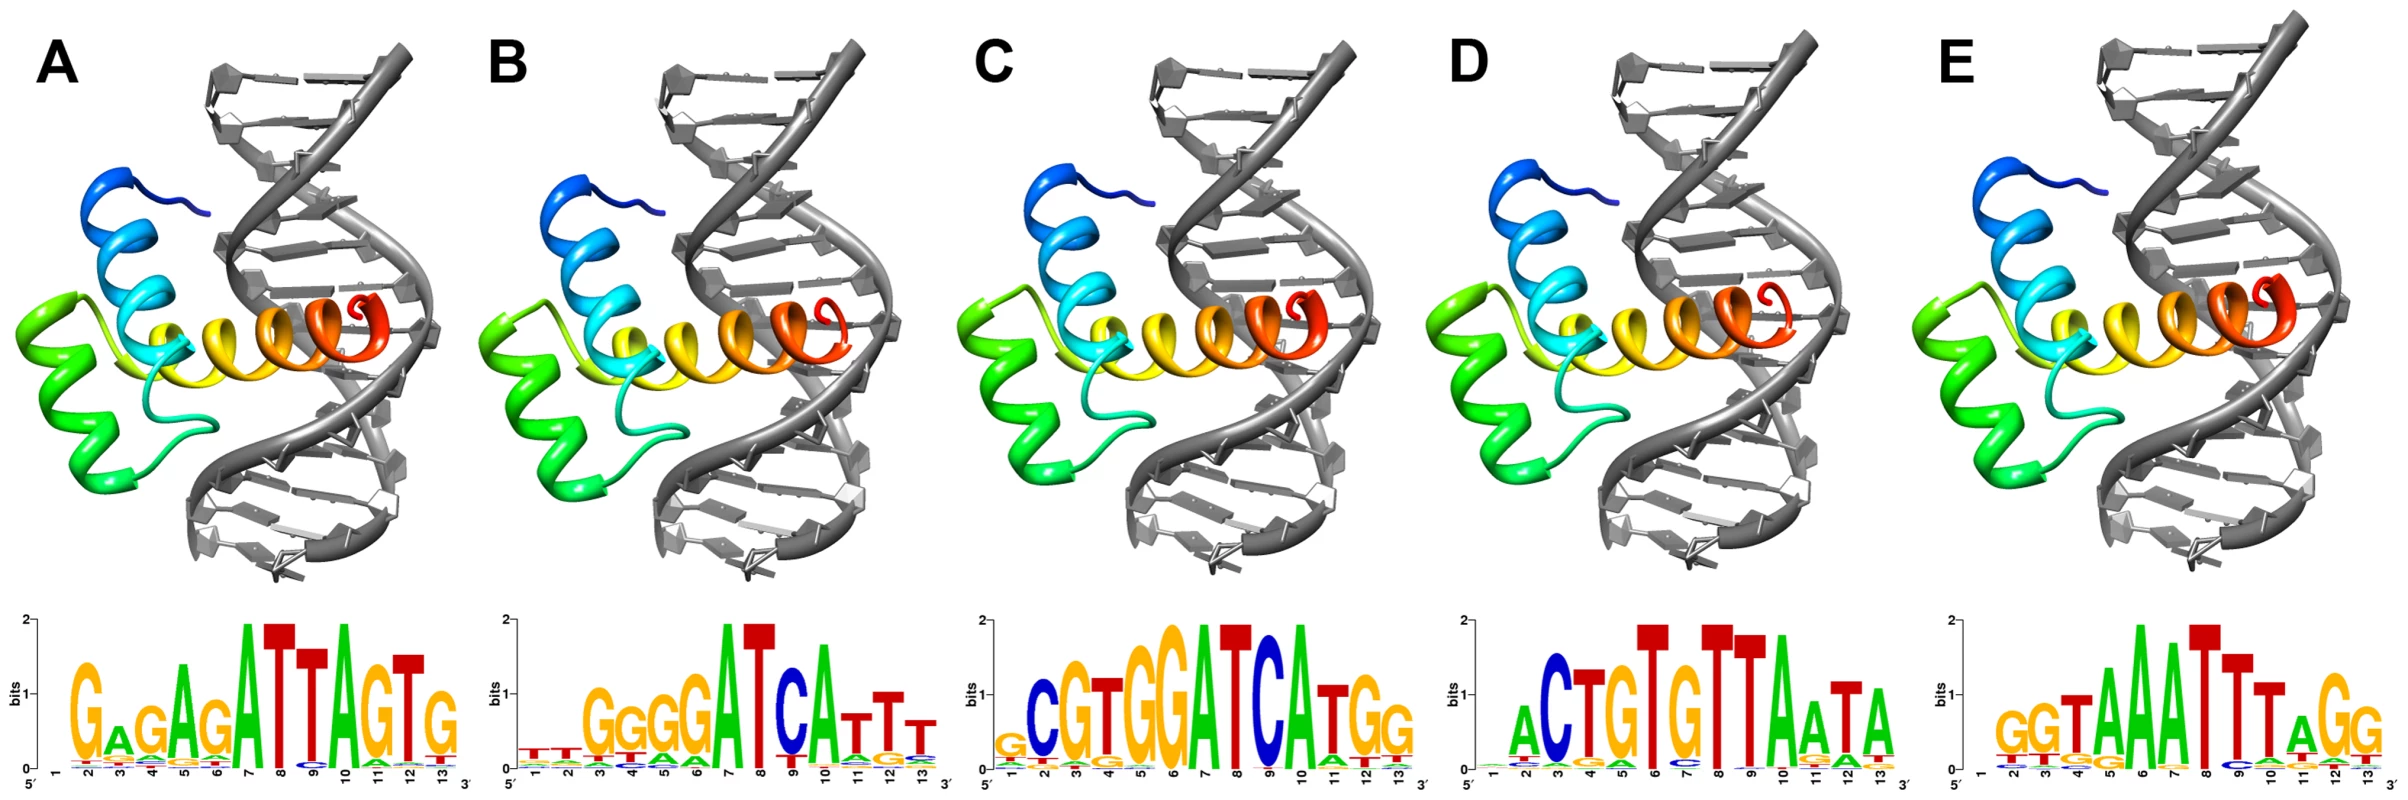 Lowest energy structural models of deduced (A) ShxA, (B) ShxB, (C) ShxC, (D) ShxD and (E) zen homeodomains from Speckled Wood <i>Pararge aegeria</i> bound to DNA sequences predicted through <i>in silico</i> evolution.